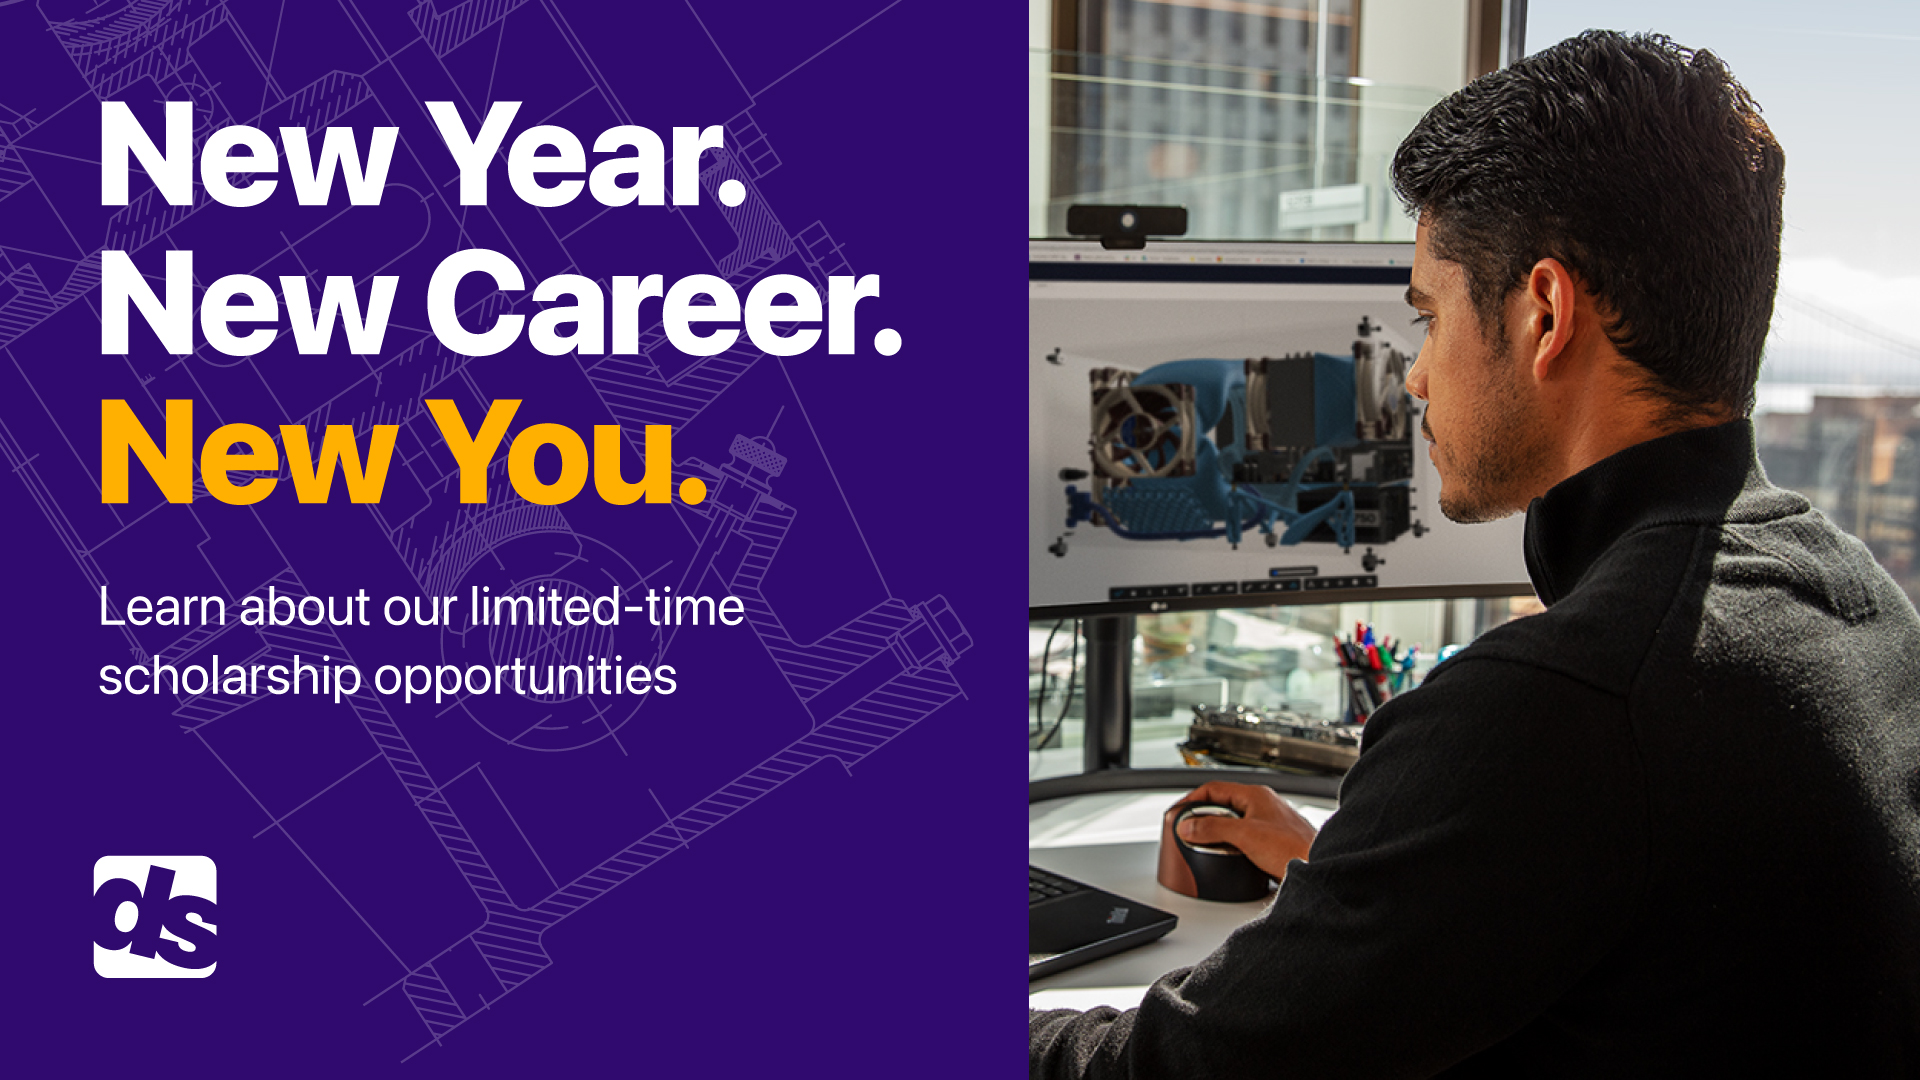 New Year. New Career. New You.